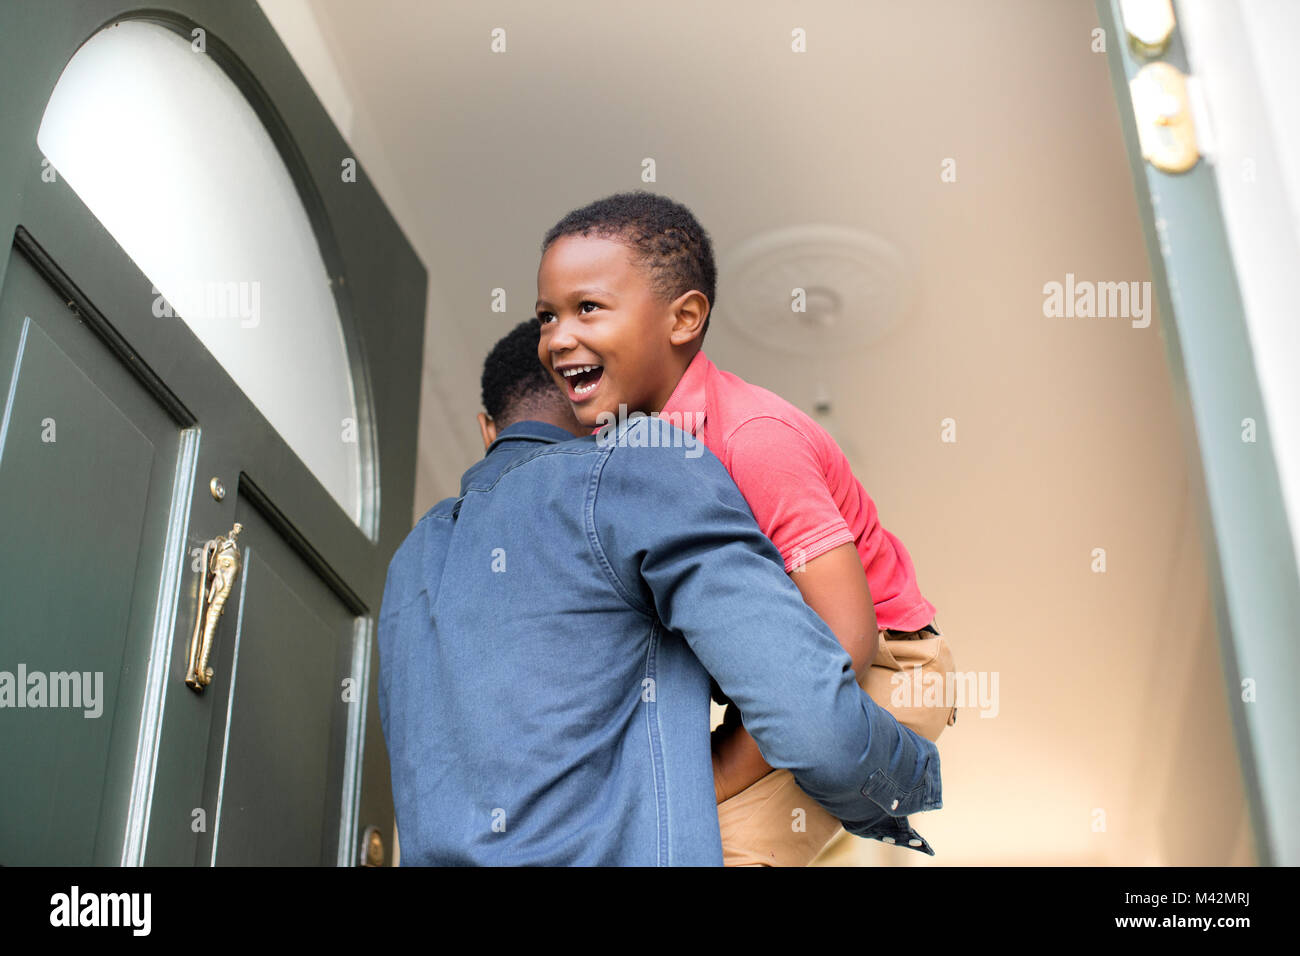 Dad carrying son into family home Stock Photo